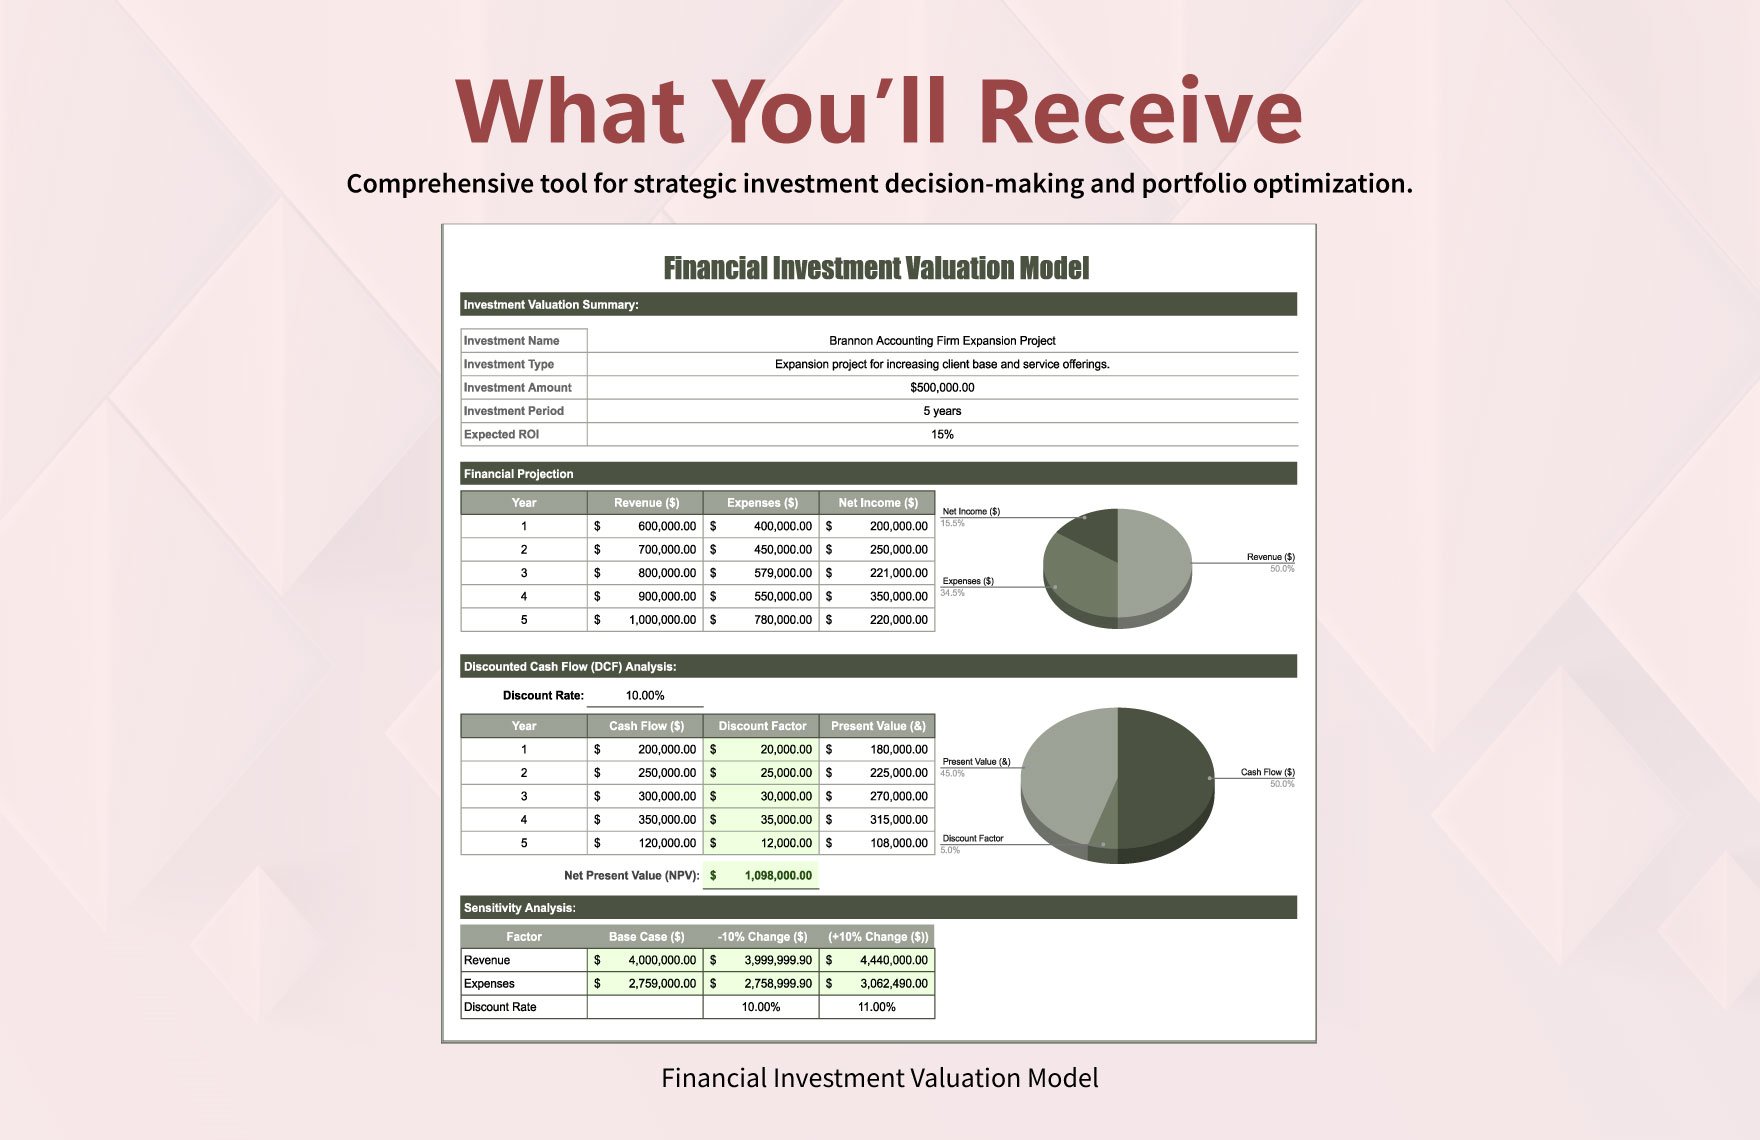 Financial Investment Valuation Model Template